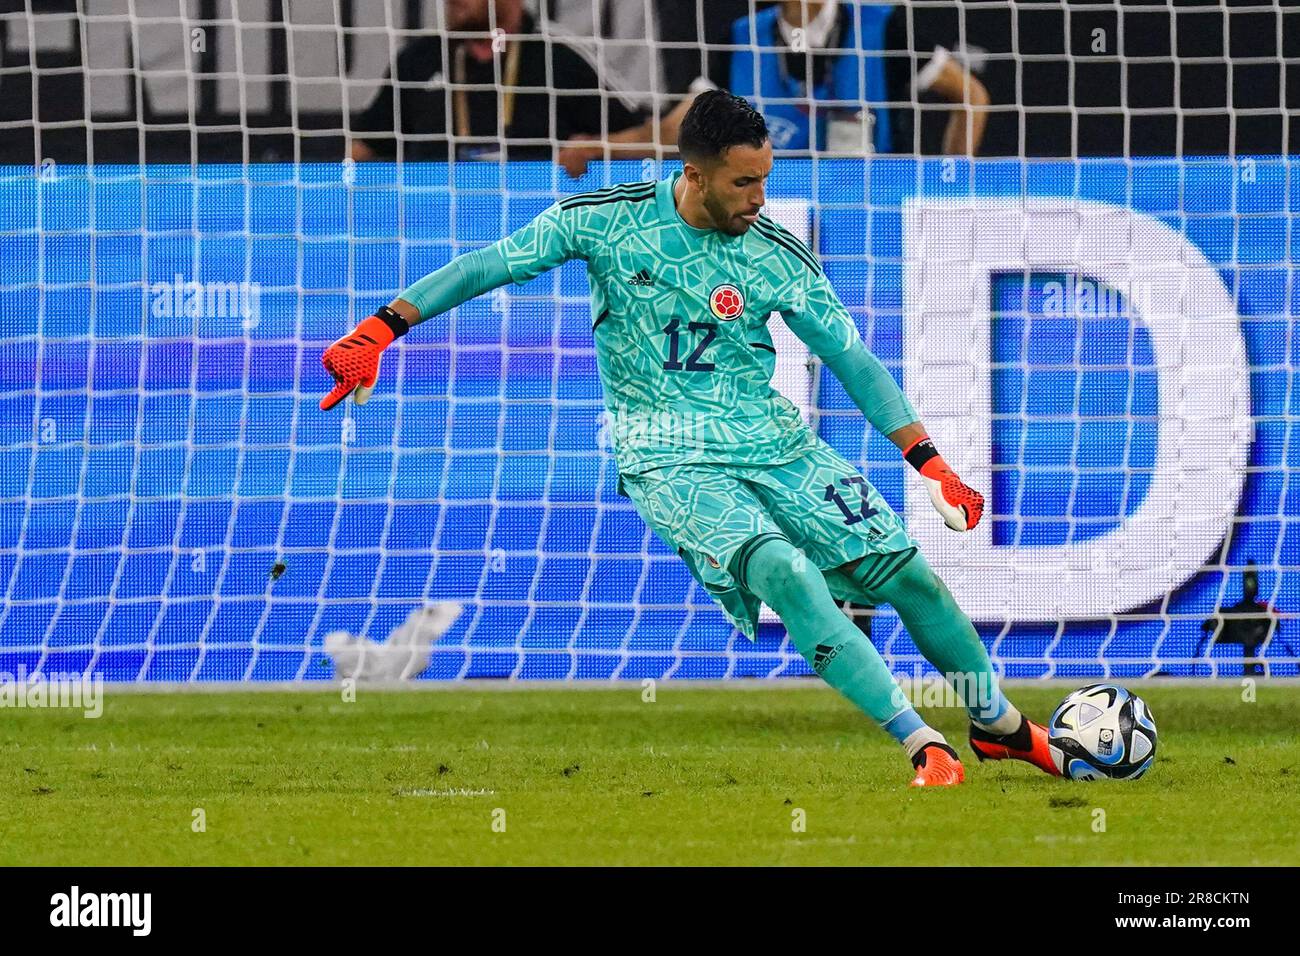 Gelsenkirchen, Germany. 20th June, 2023. GELSENKIRCHEN, GERMANY - JUNE 20: Goalkeeper Camilo Vargas of Colombia kicks the ball during the International Friendly match between Germany and Colombia at the Veltins-Arena on June 20, 2023 in Gelsenkirchen, Germany (Photo by Joris Verwijst/Orange Pictures) Credit: Orange Pics BV/Alamy Live News Stock Photo